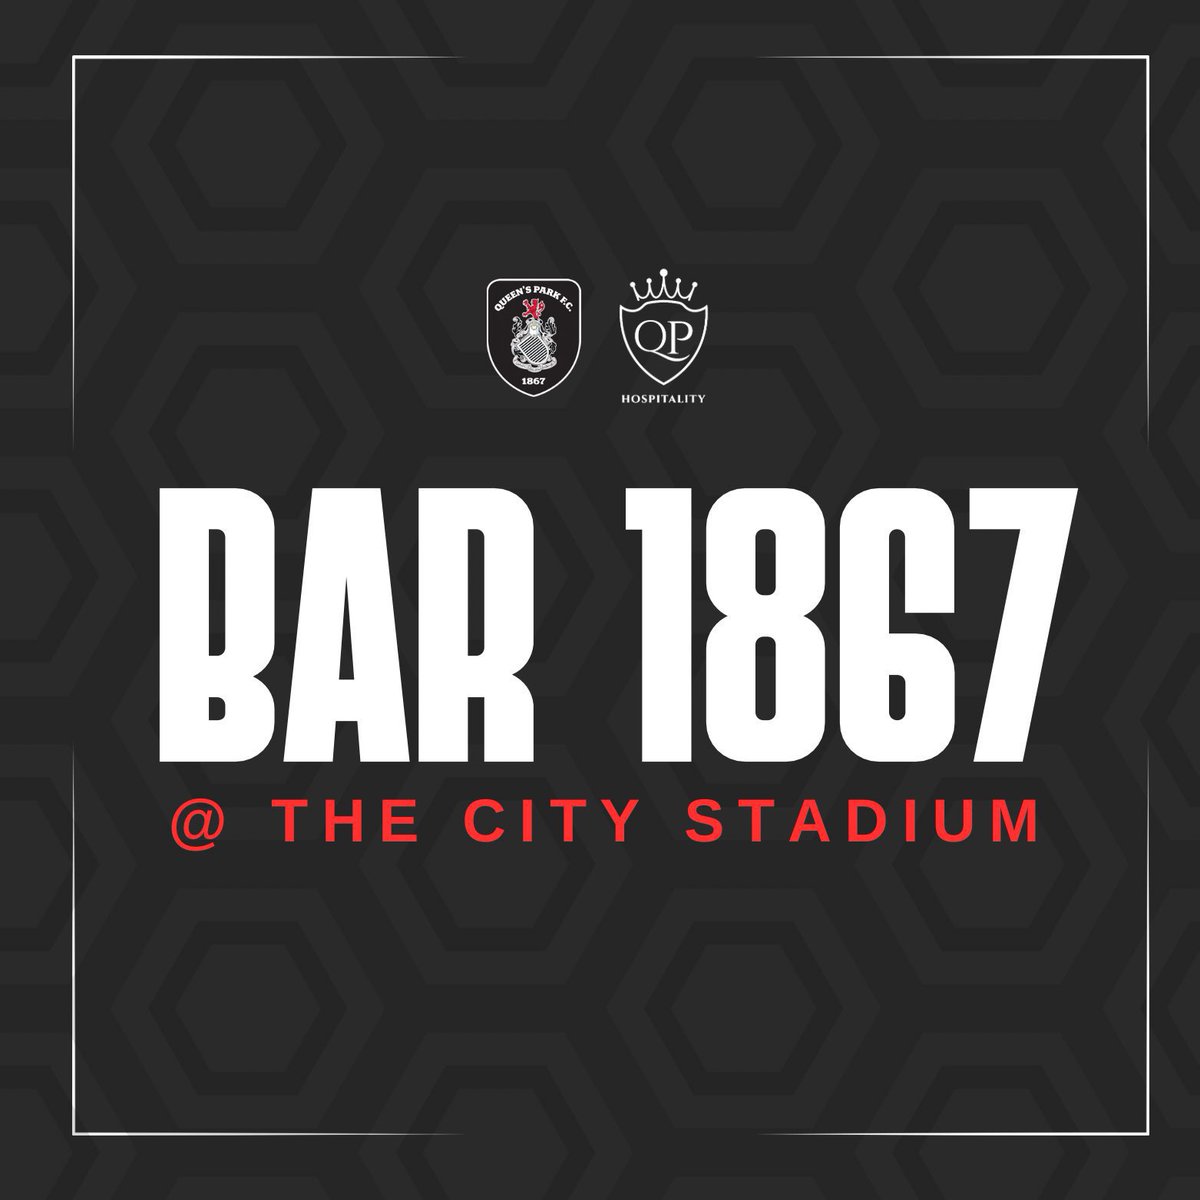 Bar 1867 at The city Stadium will be open to all supporters from 12:45 ahead of tomorrow’s game against @ICTFC, and then again immediately post match.